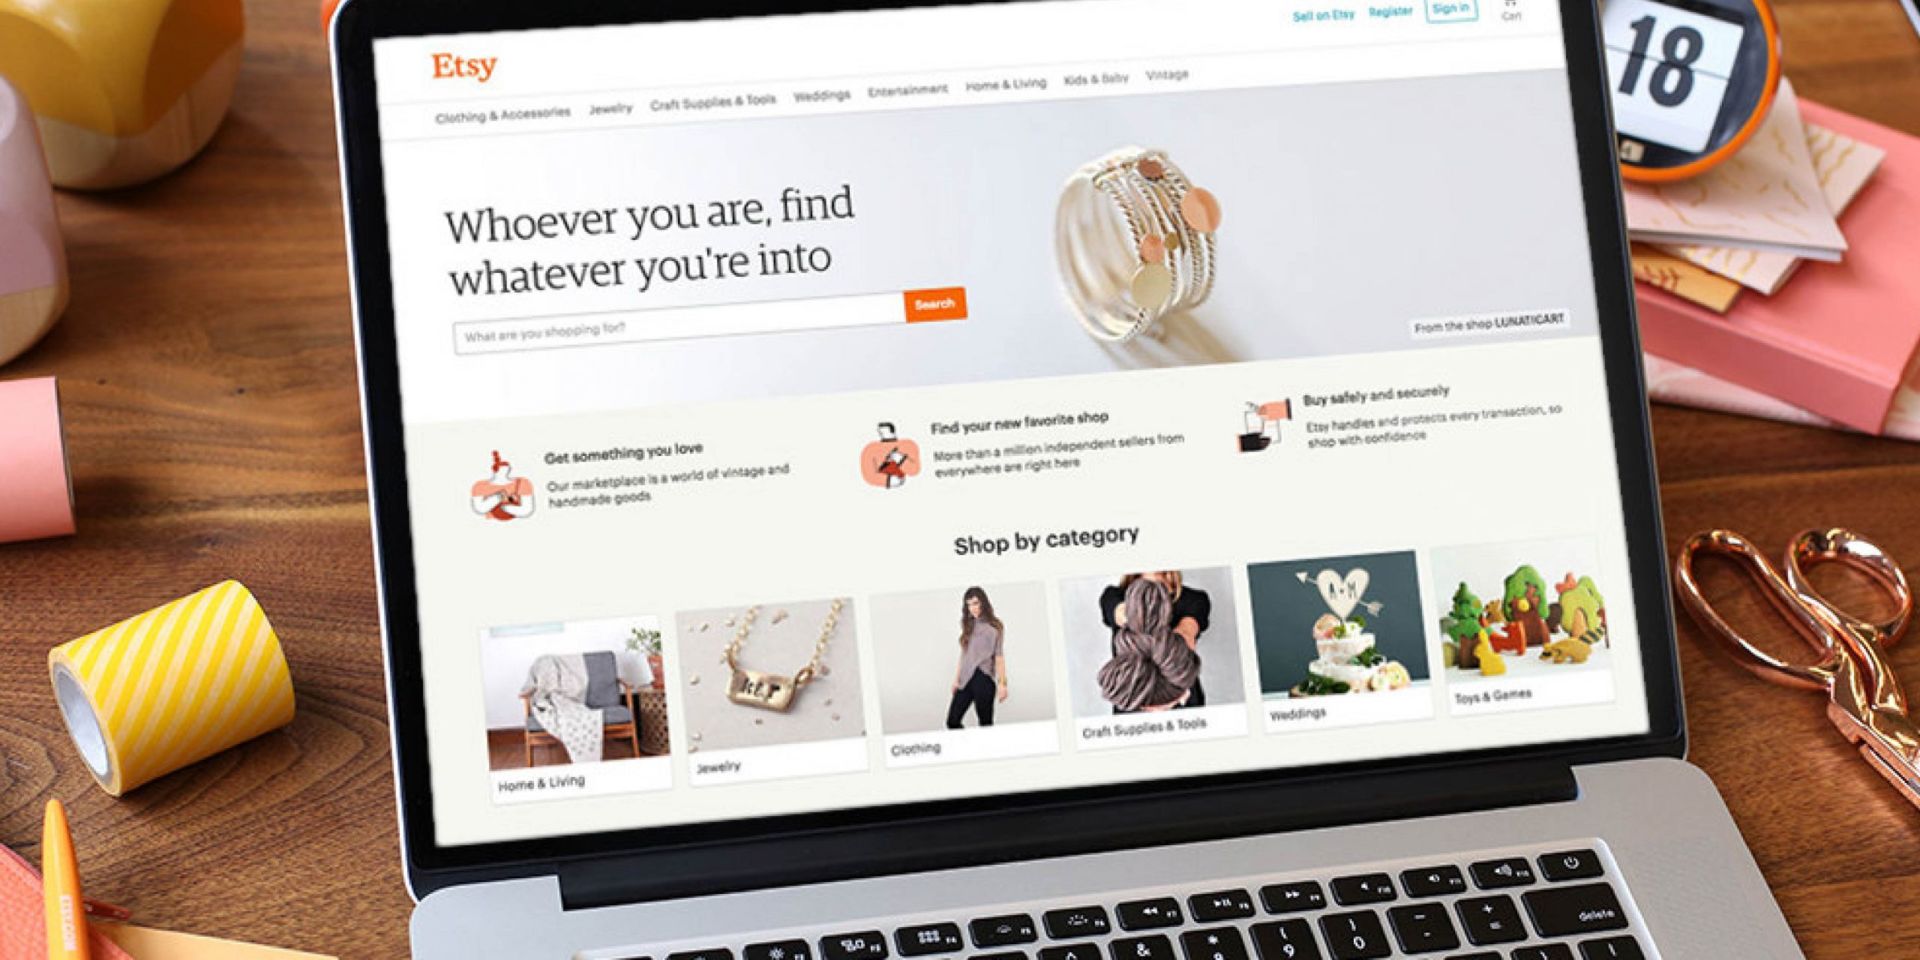 Etsy-top-e-commerce-marketplace-in-APAC